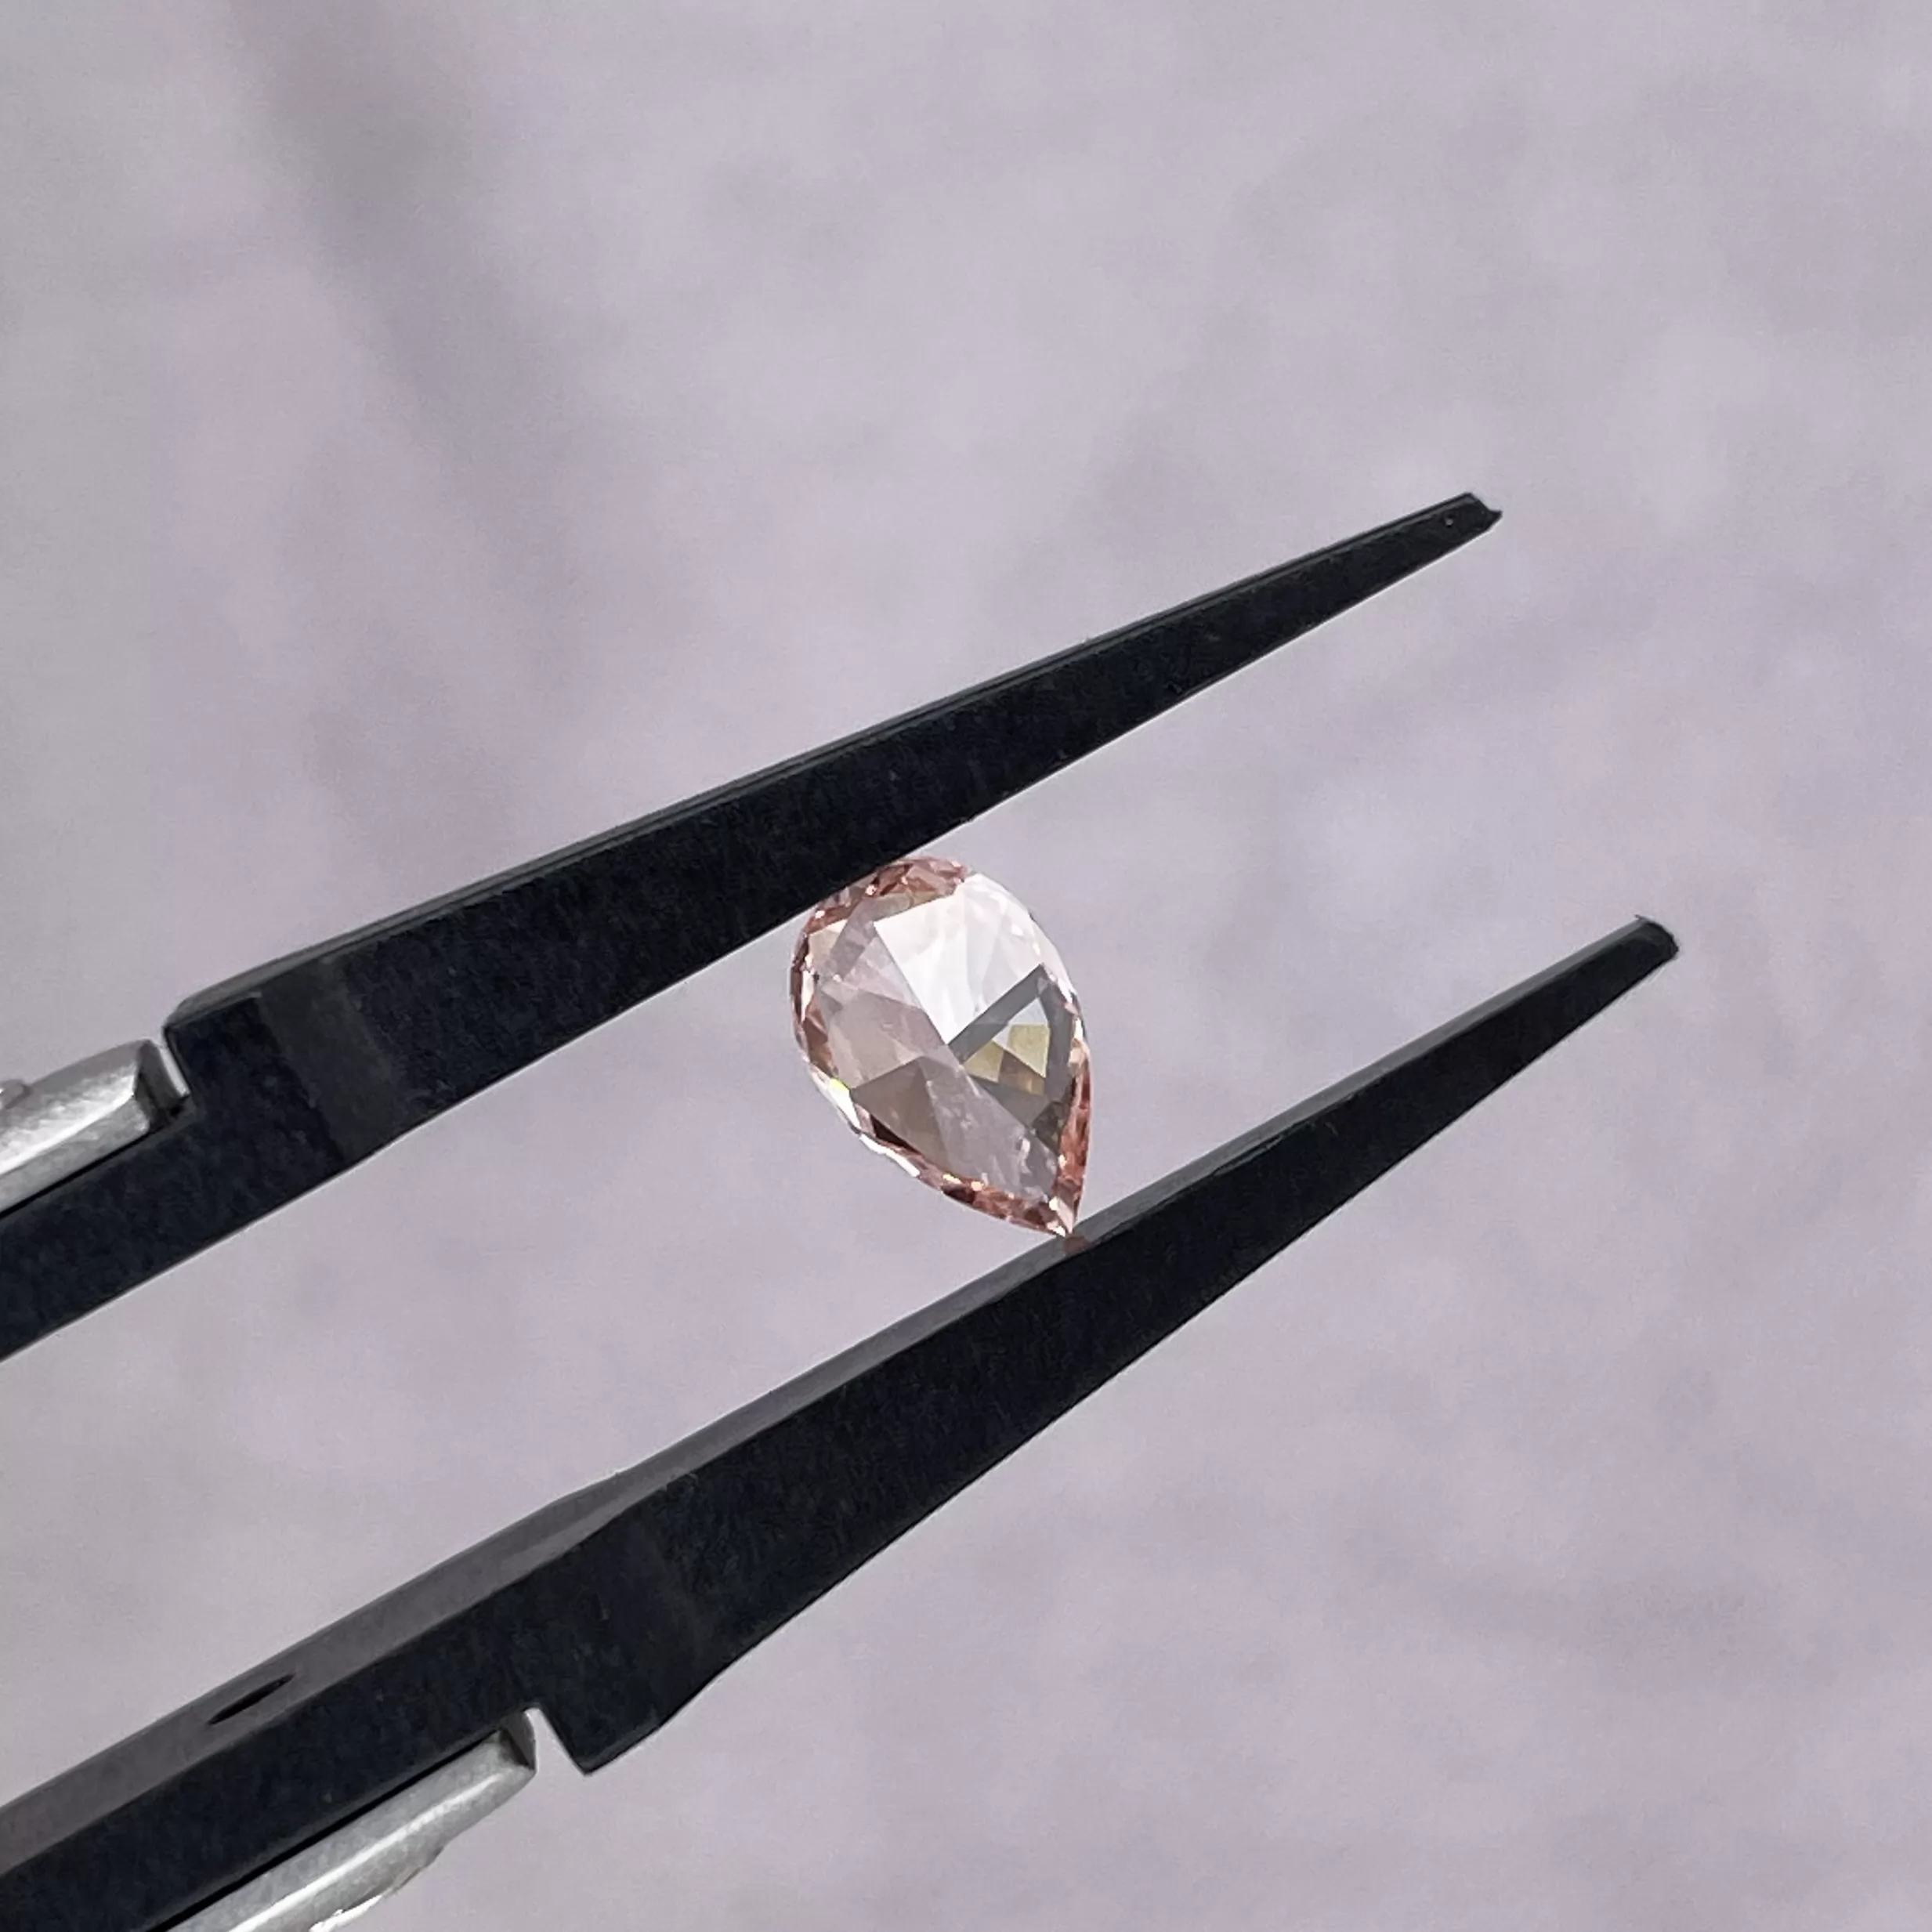 Pink Color 0.20ct to 1.16ct Pear Cut Lab Grown Diamond